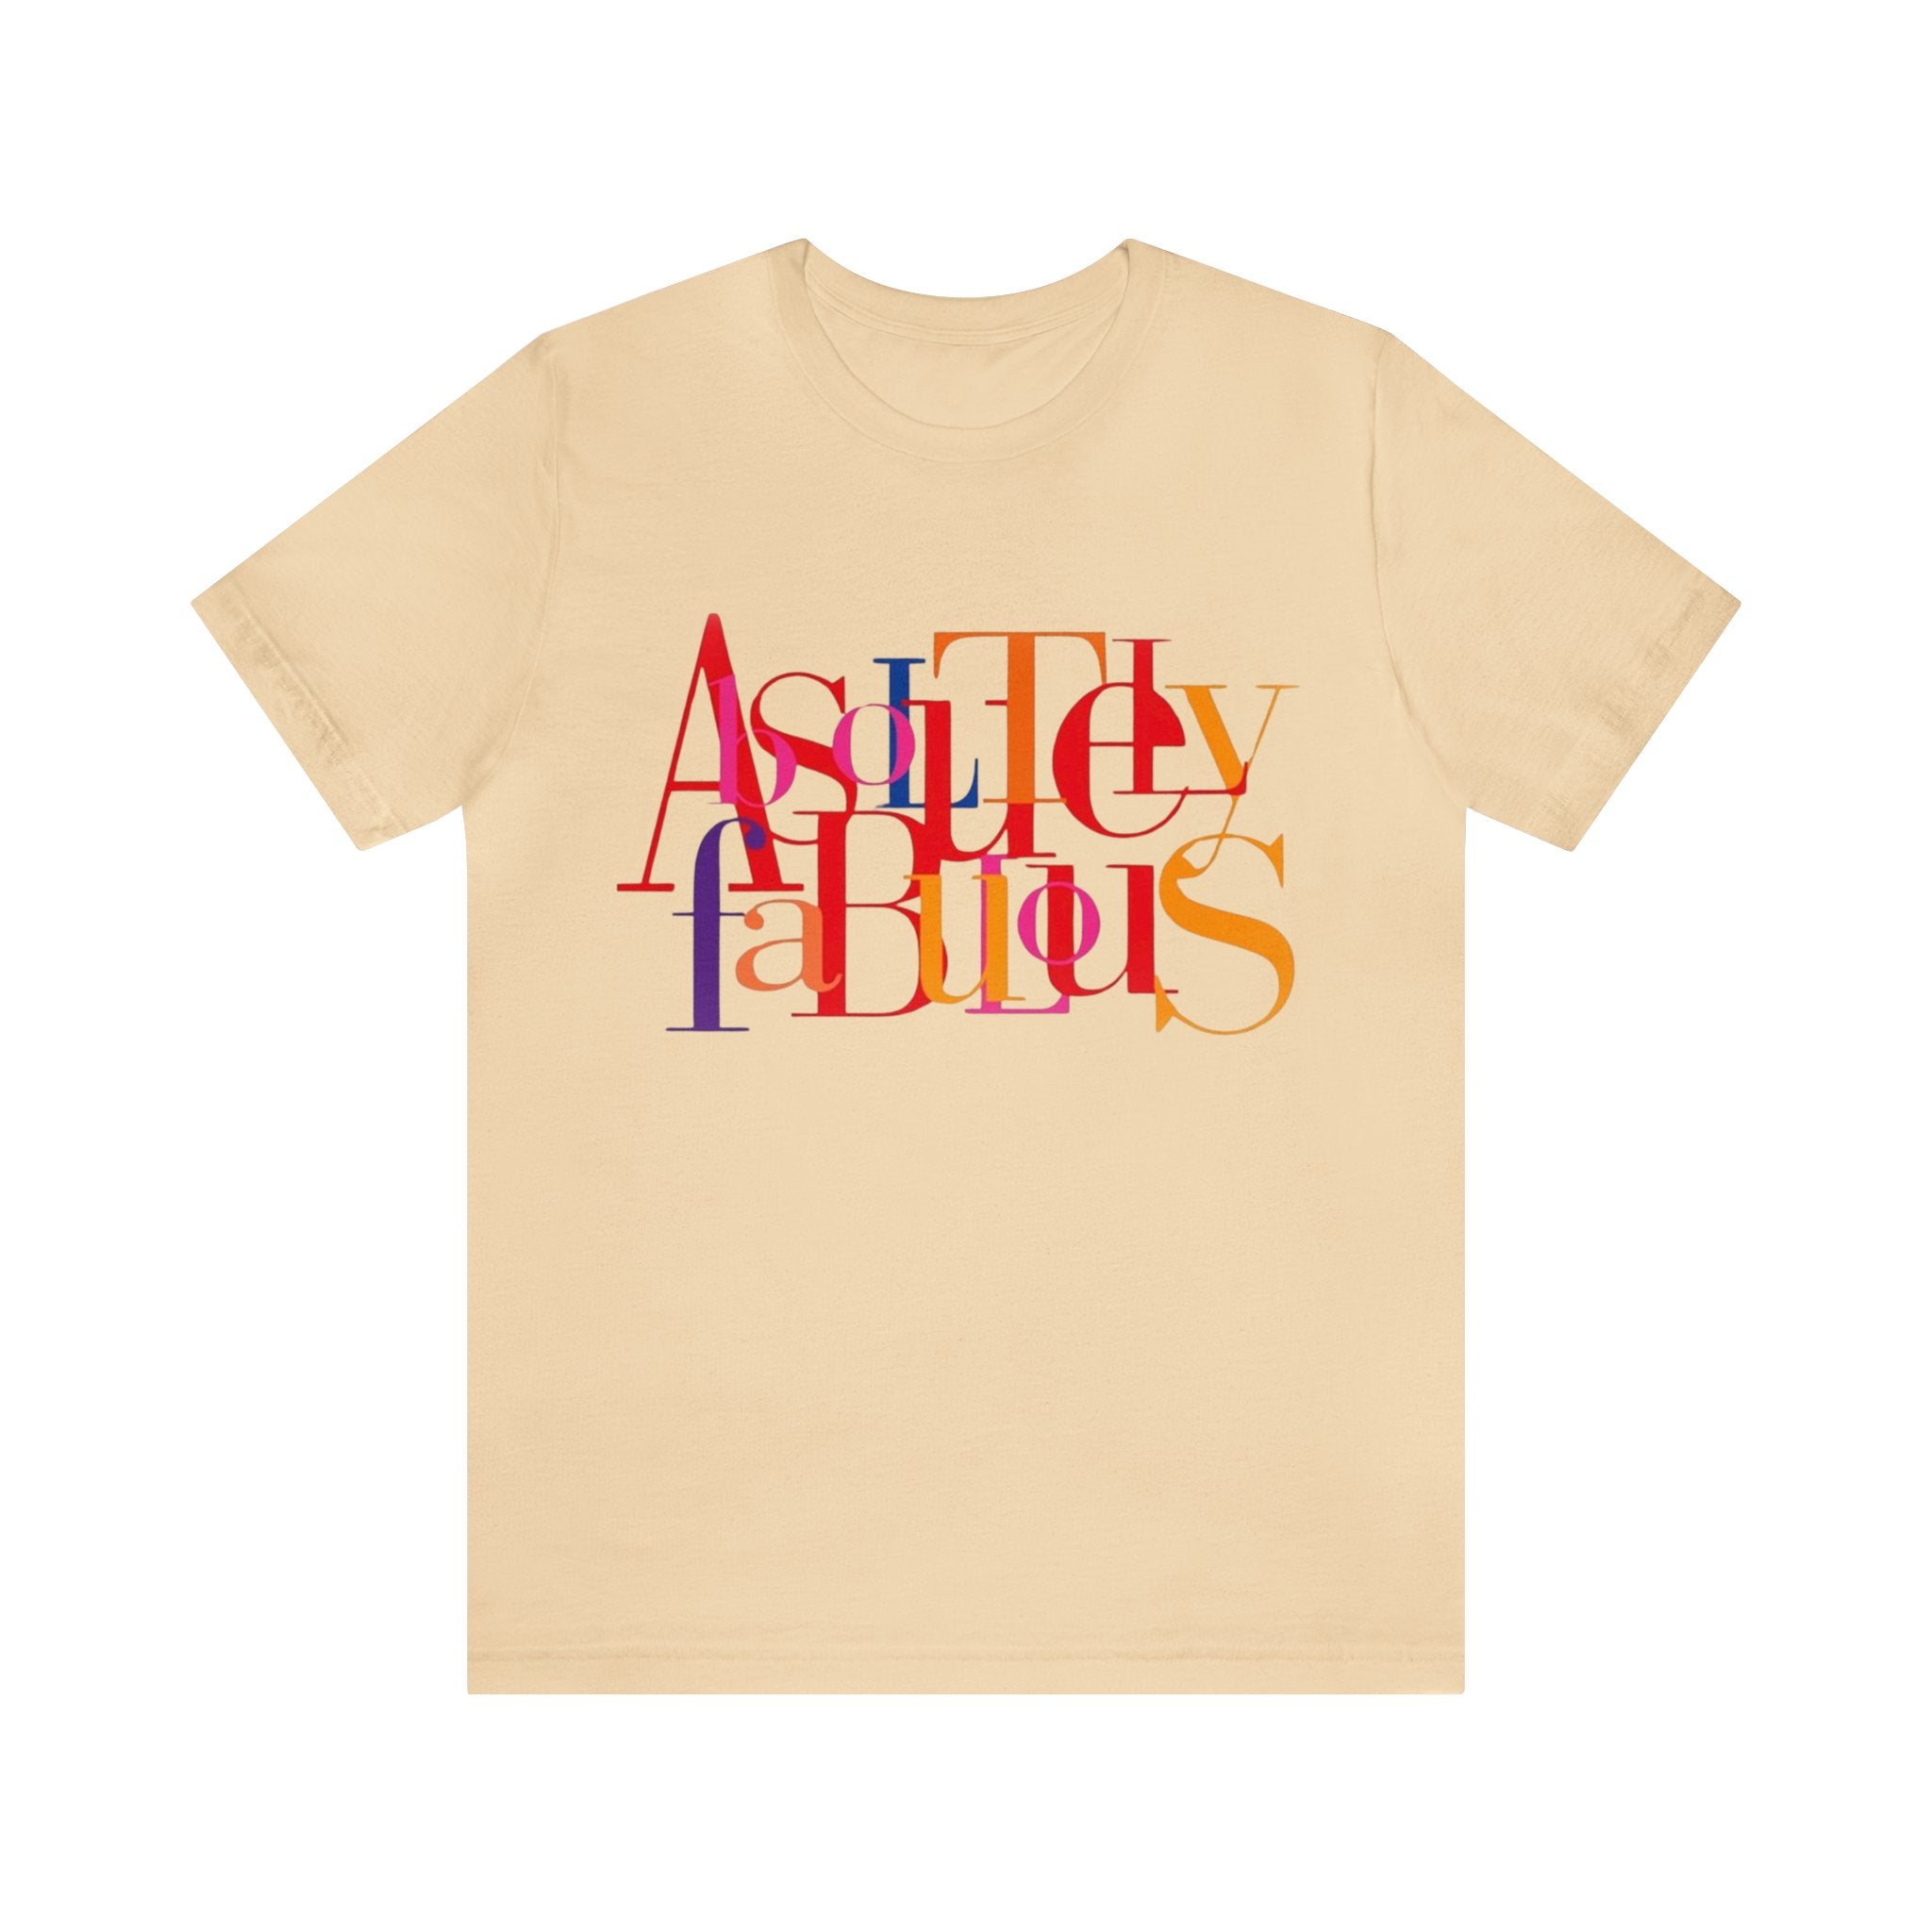 https://creationsbychrisandcarlos.store/products/absolutely-fabulous-unisex-jersey-short-sleeve-tee-1